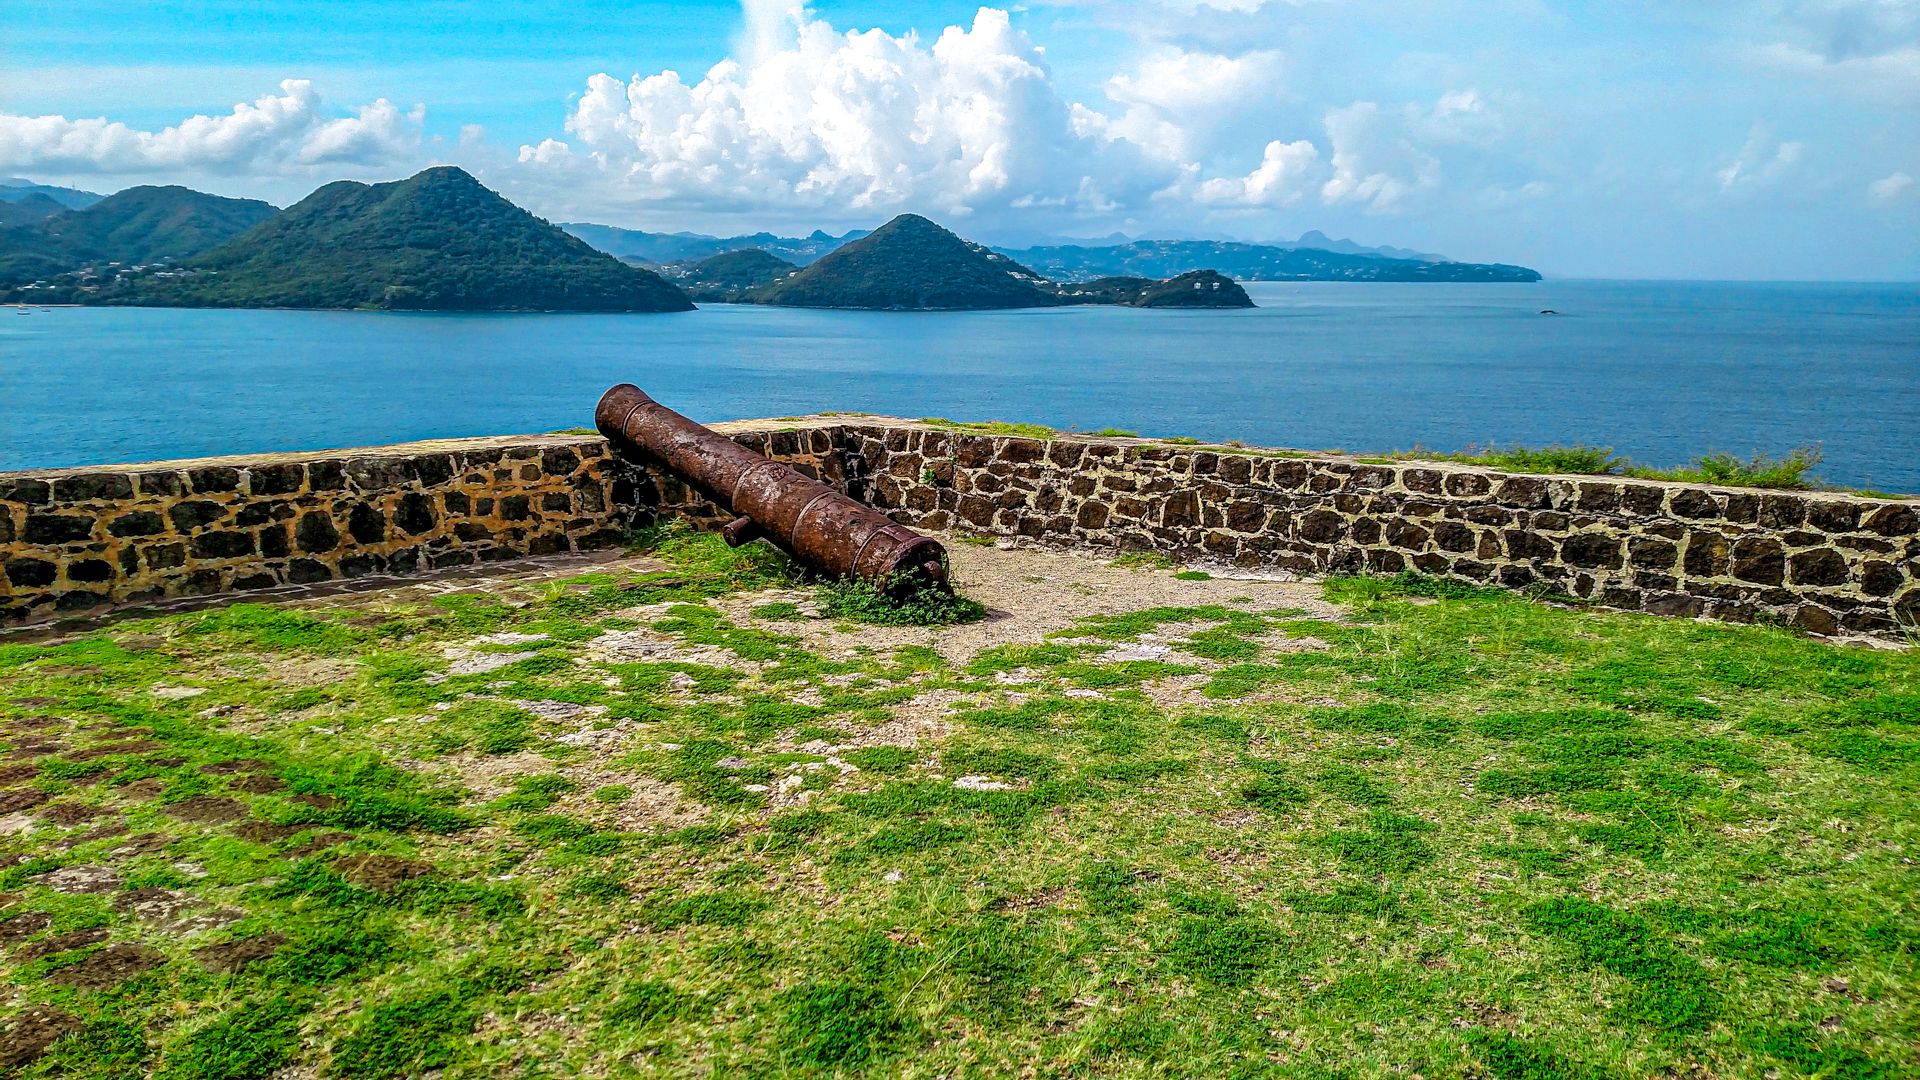 Fort San Lucian Wallpapers